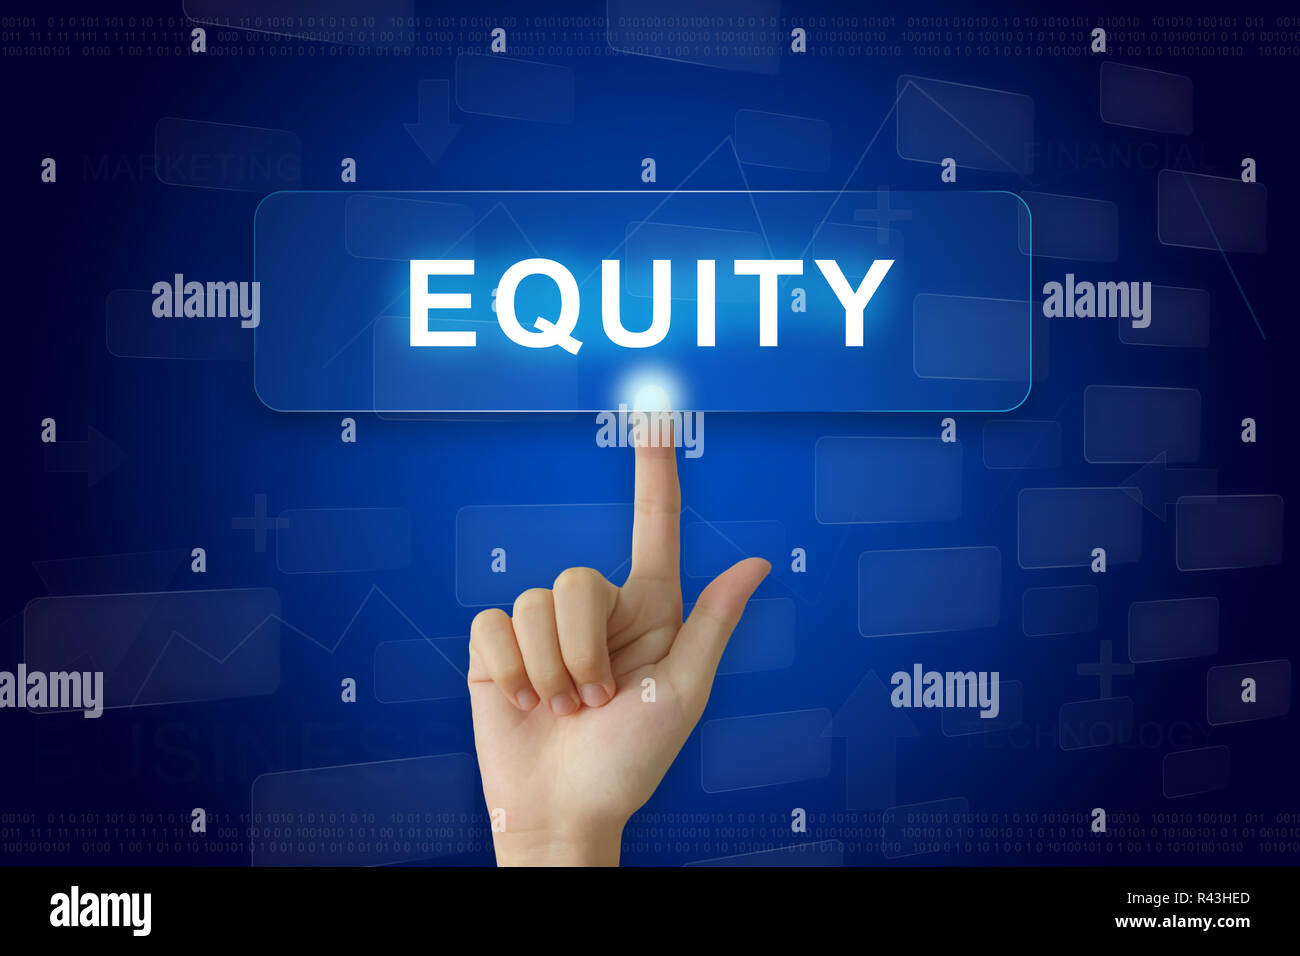 hand press on equity button on touch screen Stock Photo